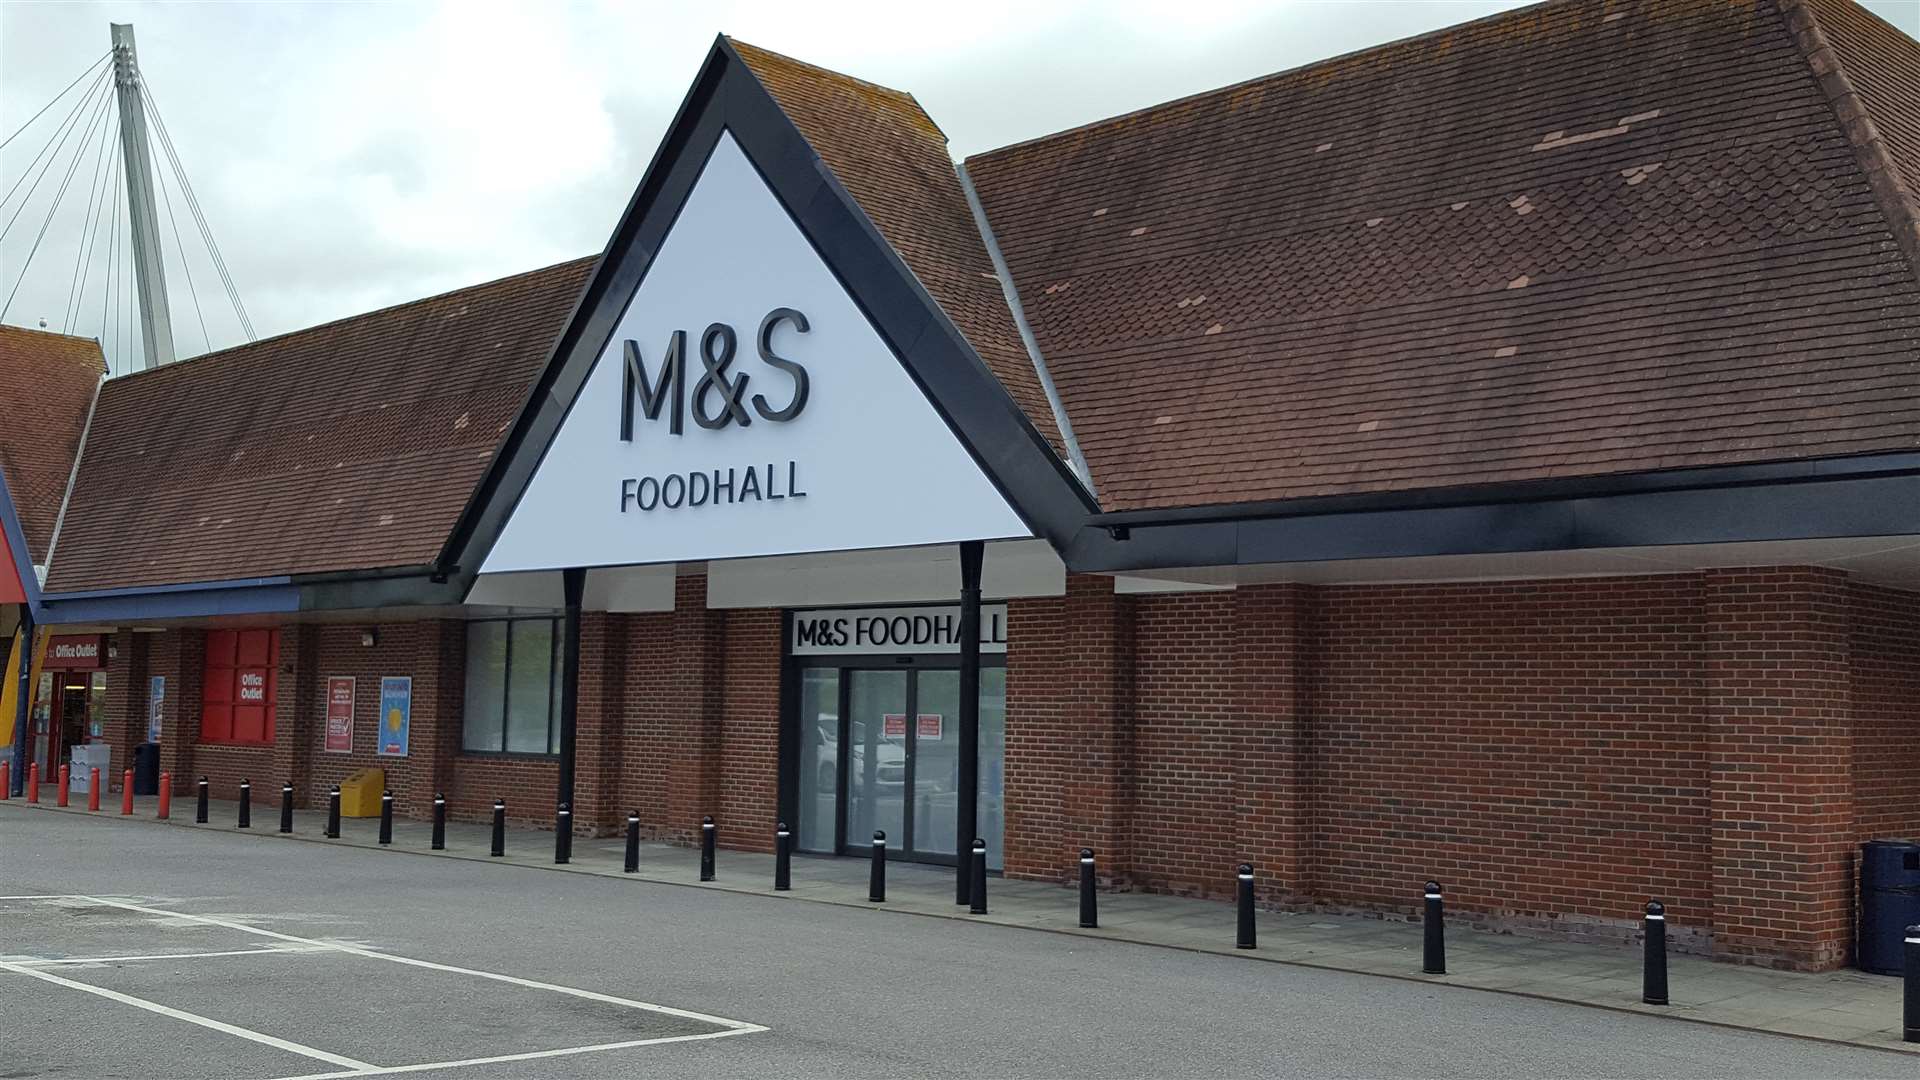 The new M&S Foodhall at the Warren Retail Park in Ashford